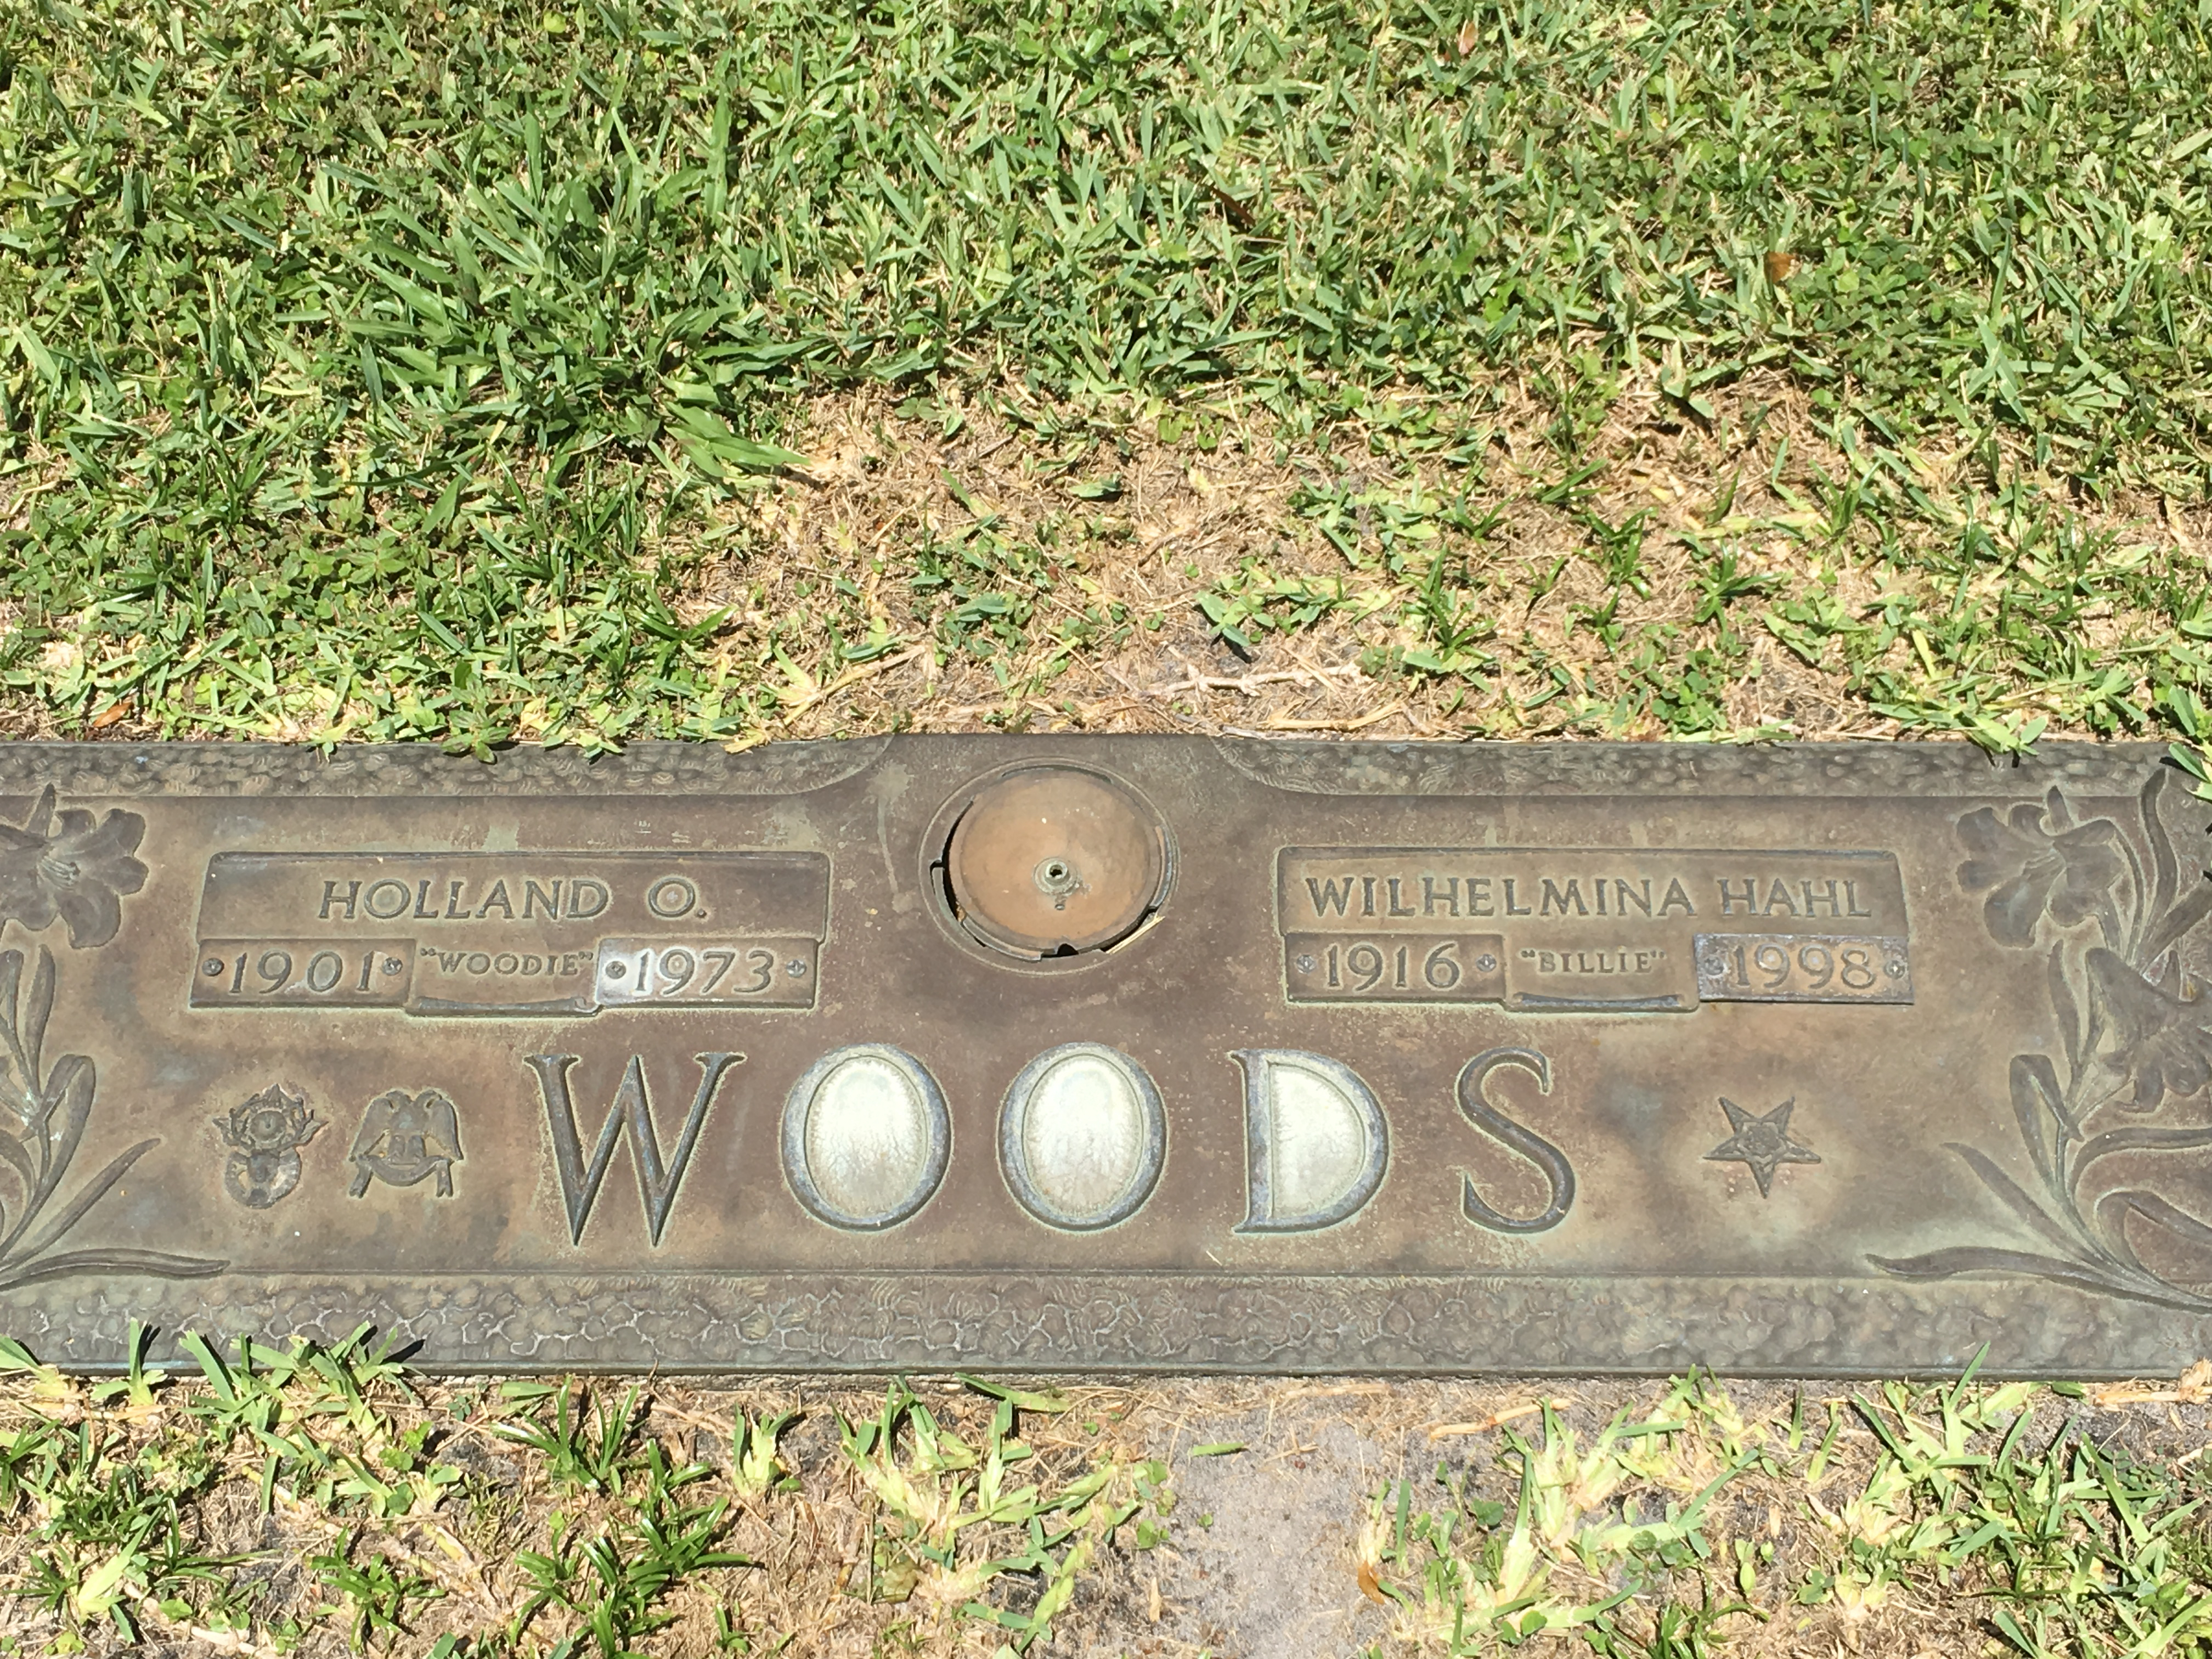 Holland O "Woodie" Woods